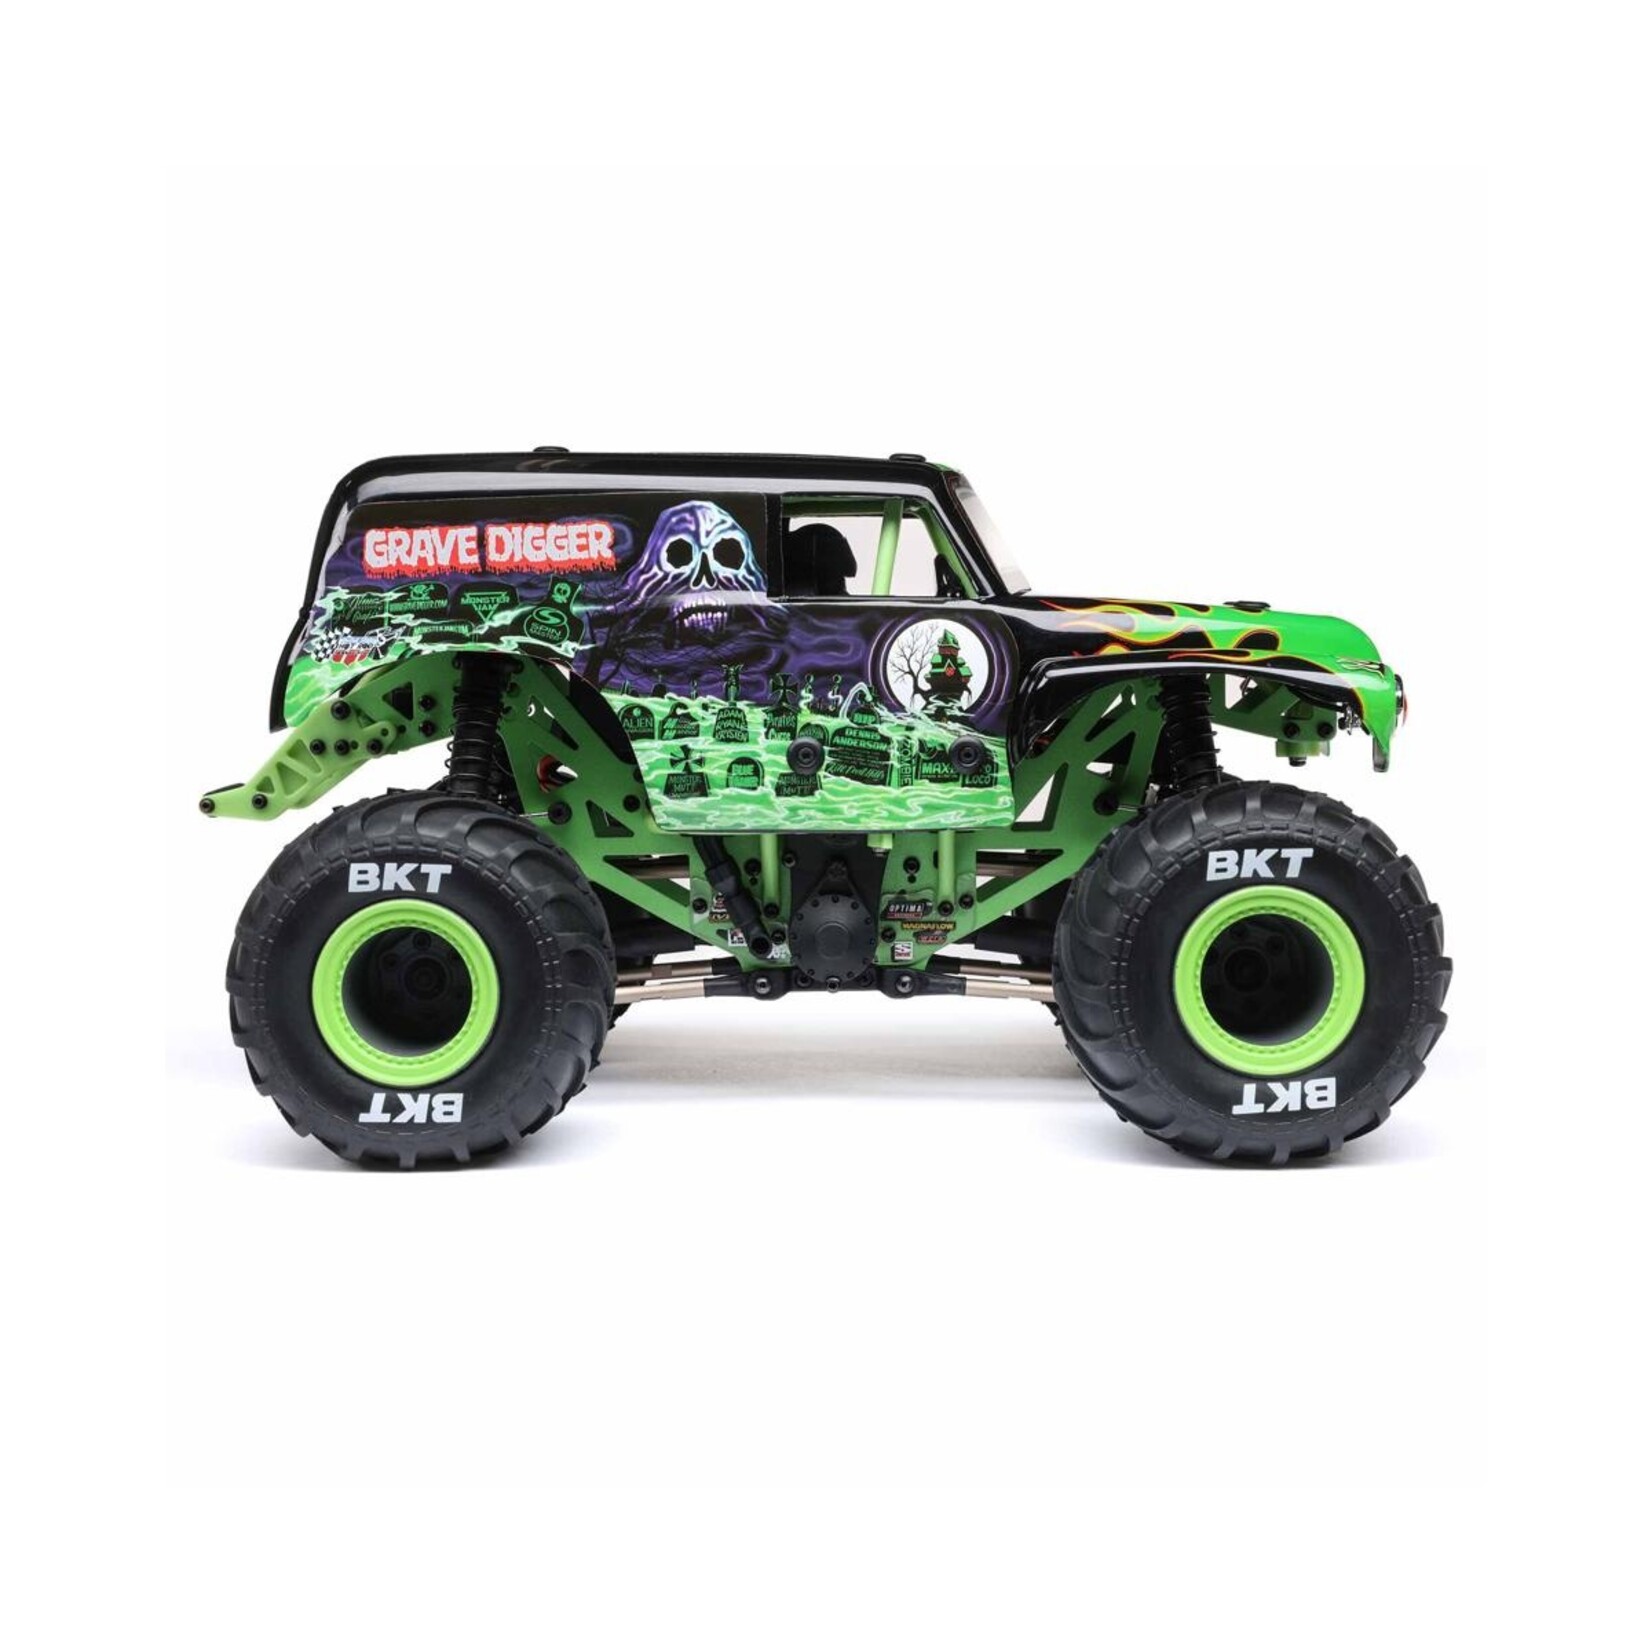 Losi Losi 1/18 Mini LMT 4X4 Brushed RTR Monster Truck (Grave Digger) w/SLT2 2.4GHz Radio, Battery & Charger #LOS01026T1